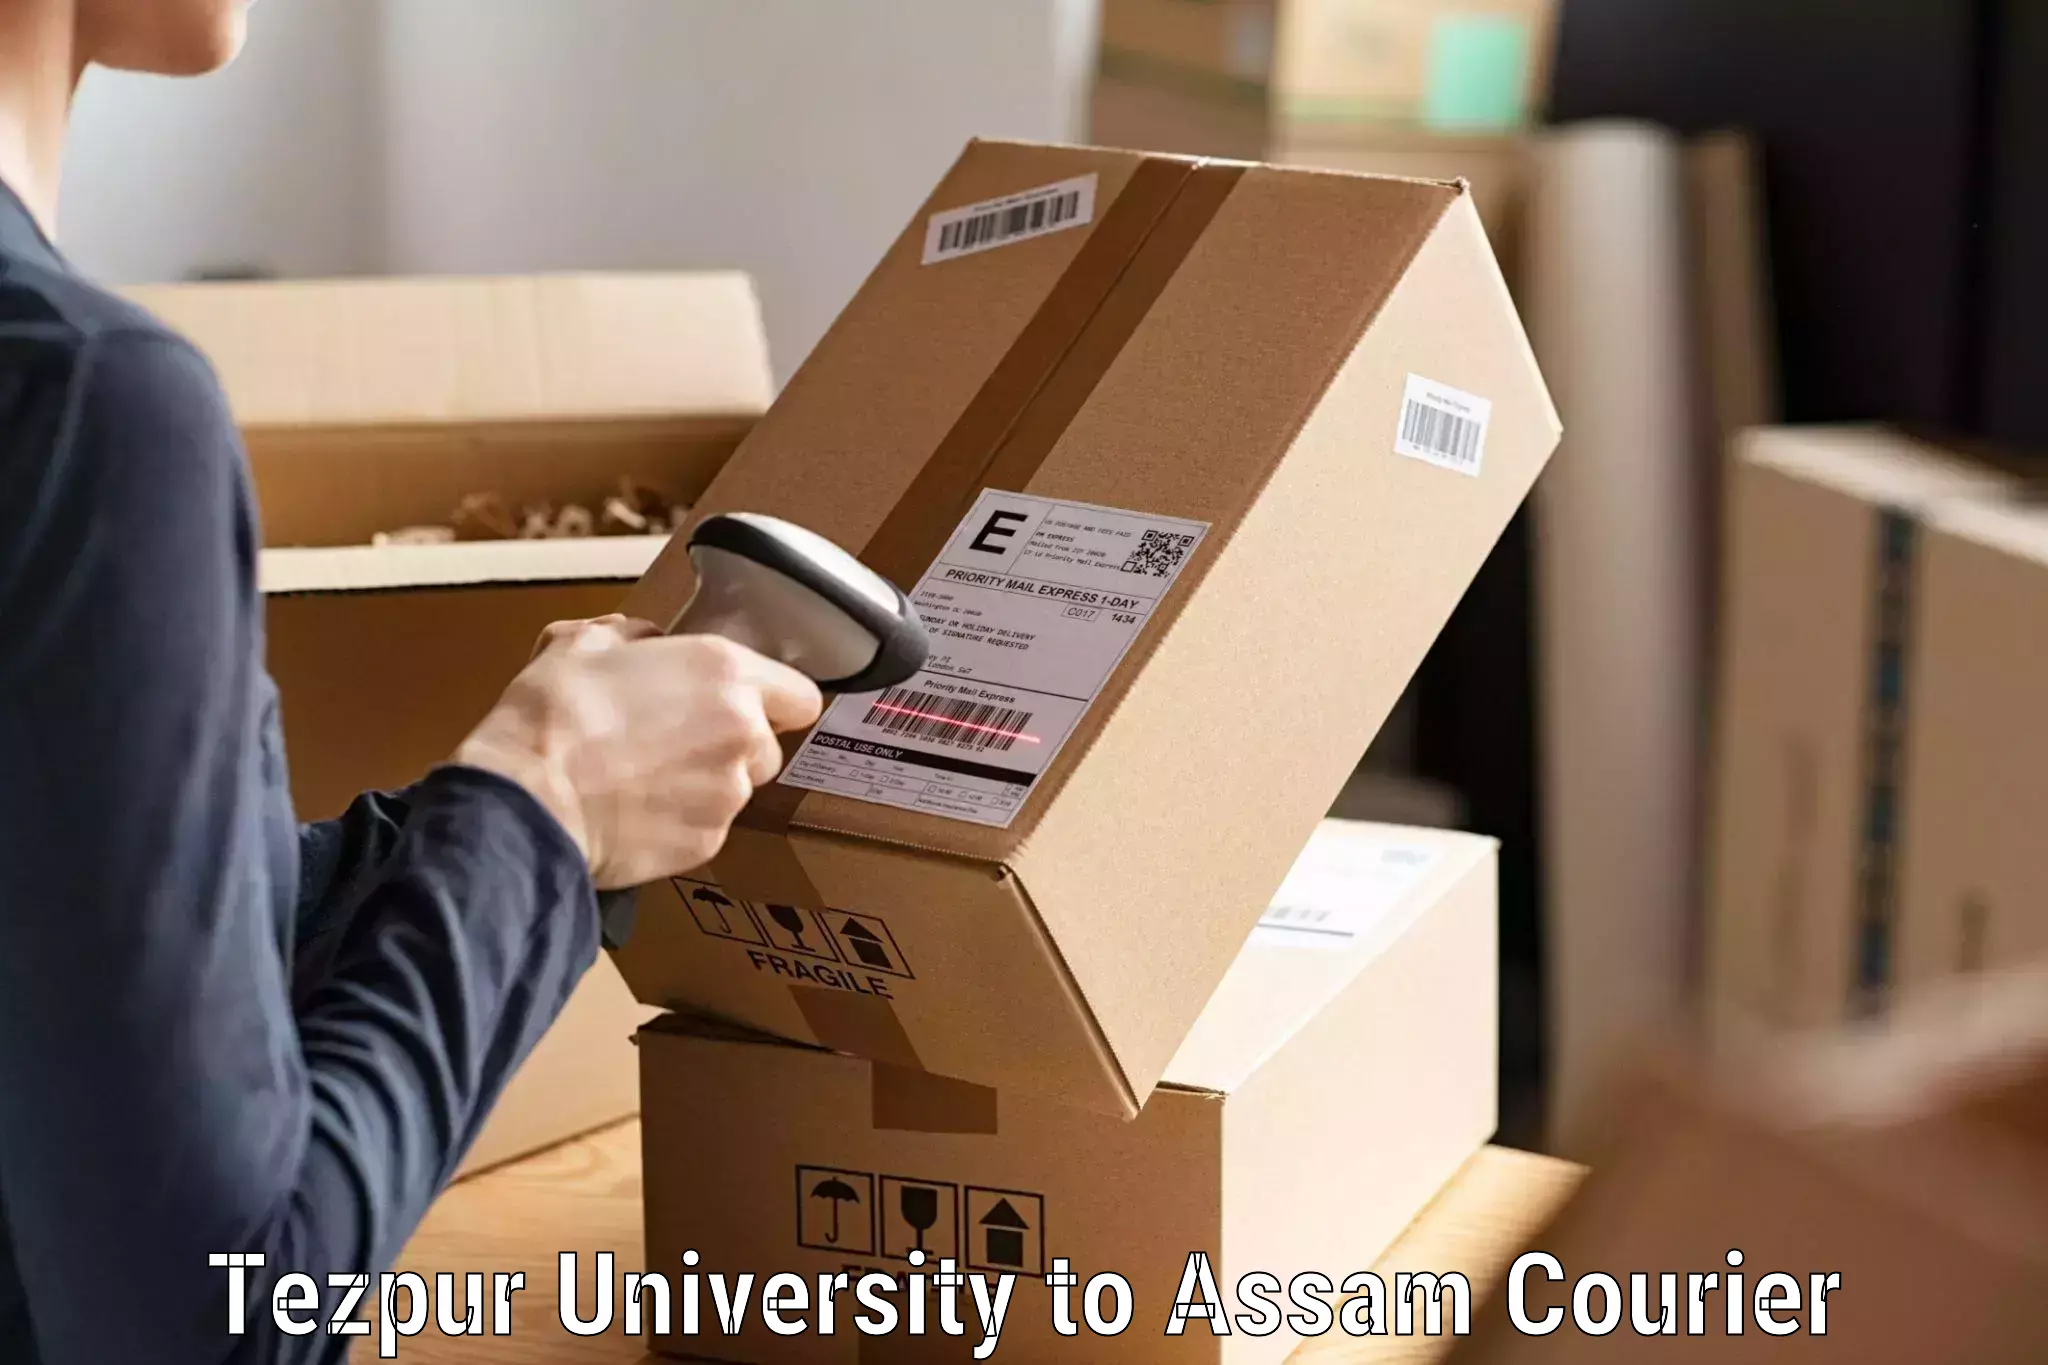 Customer-focused courier Tezpur University to Silchar